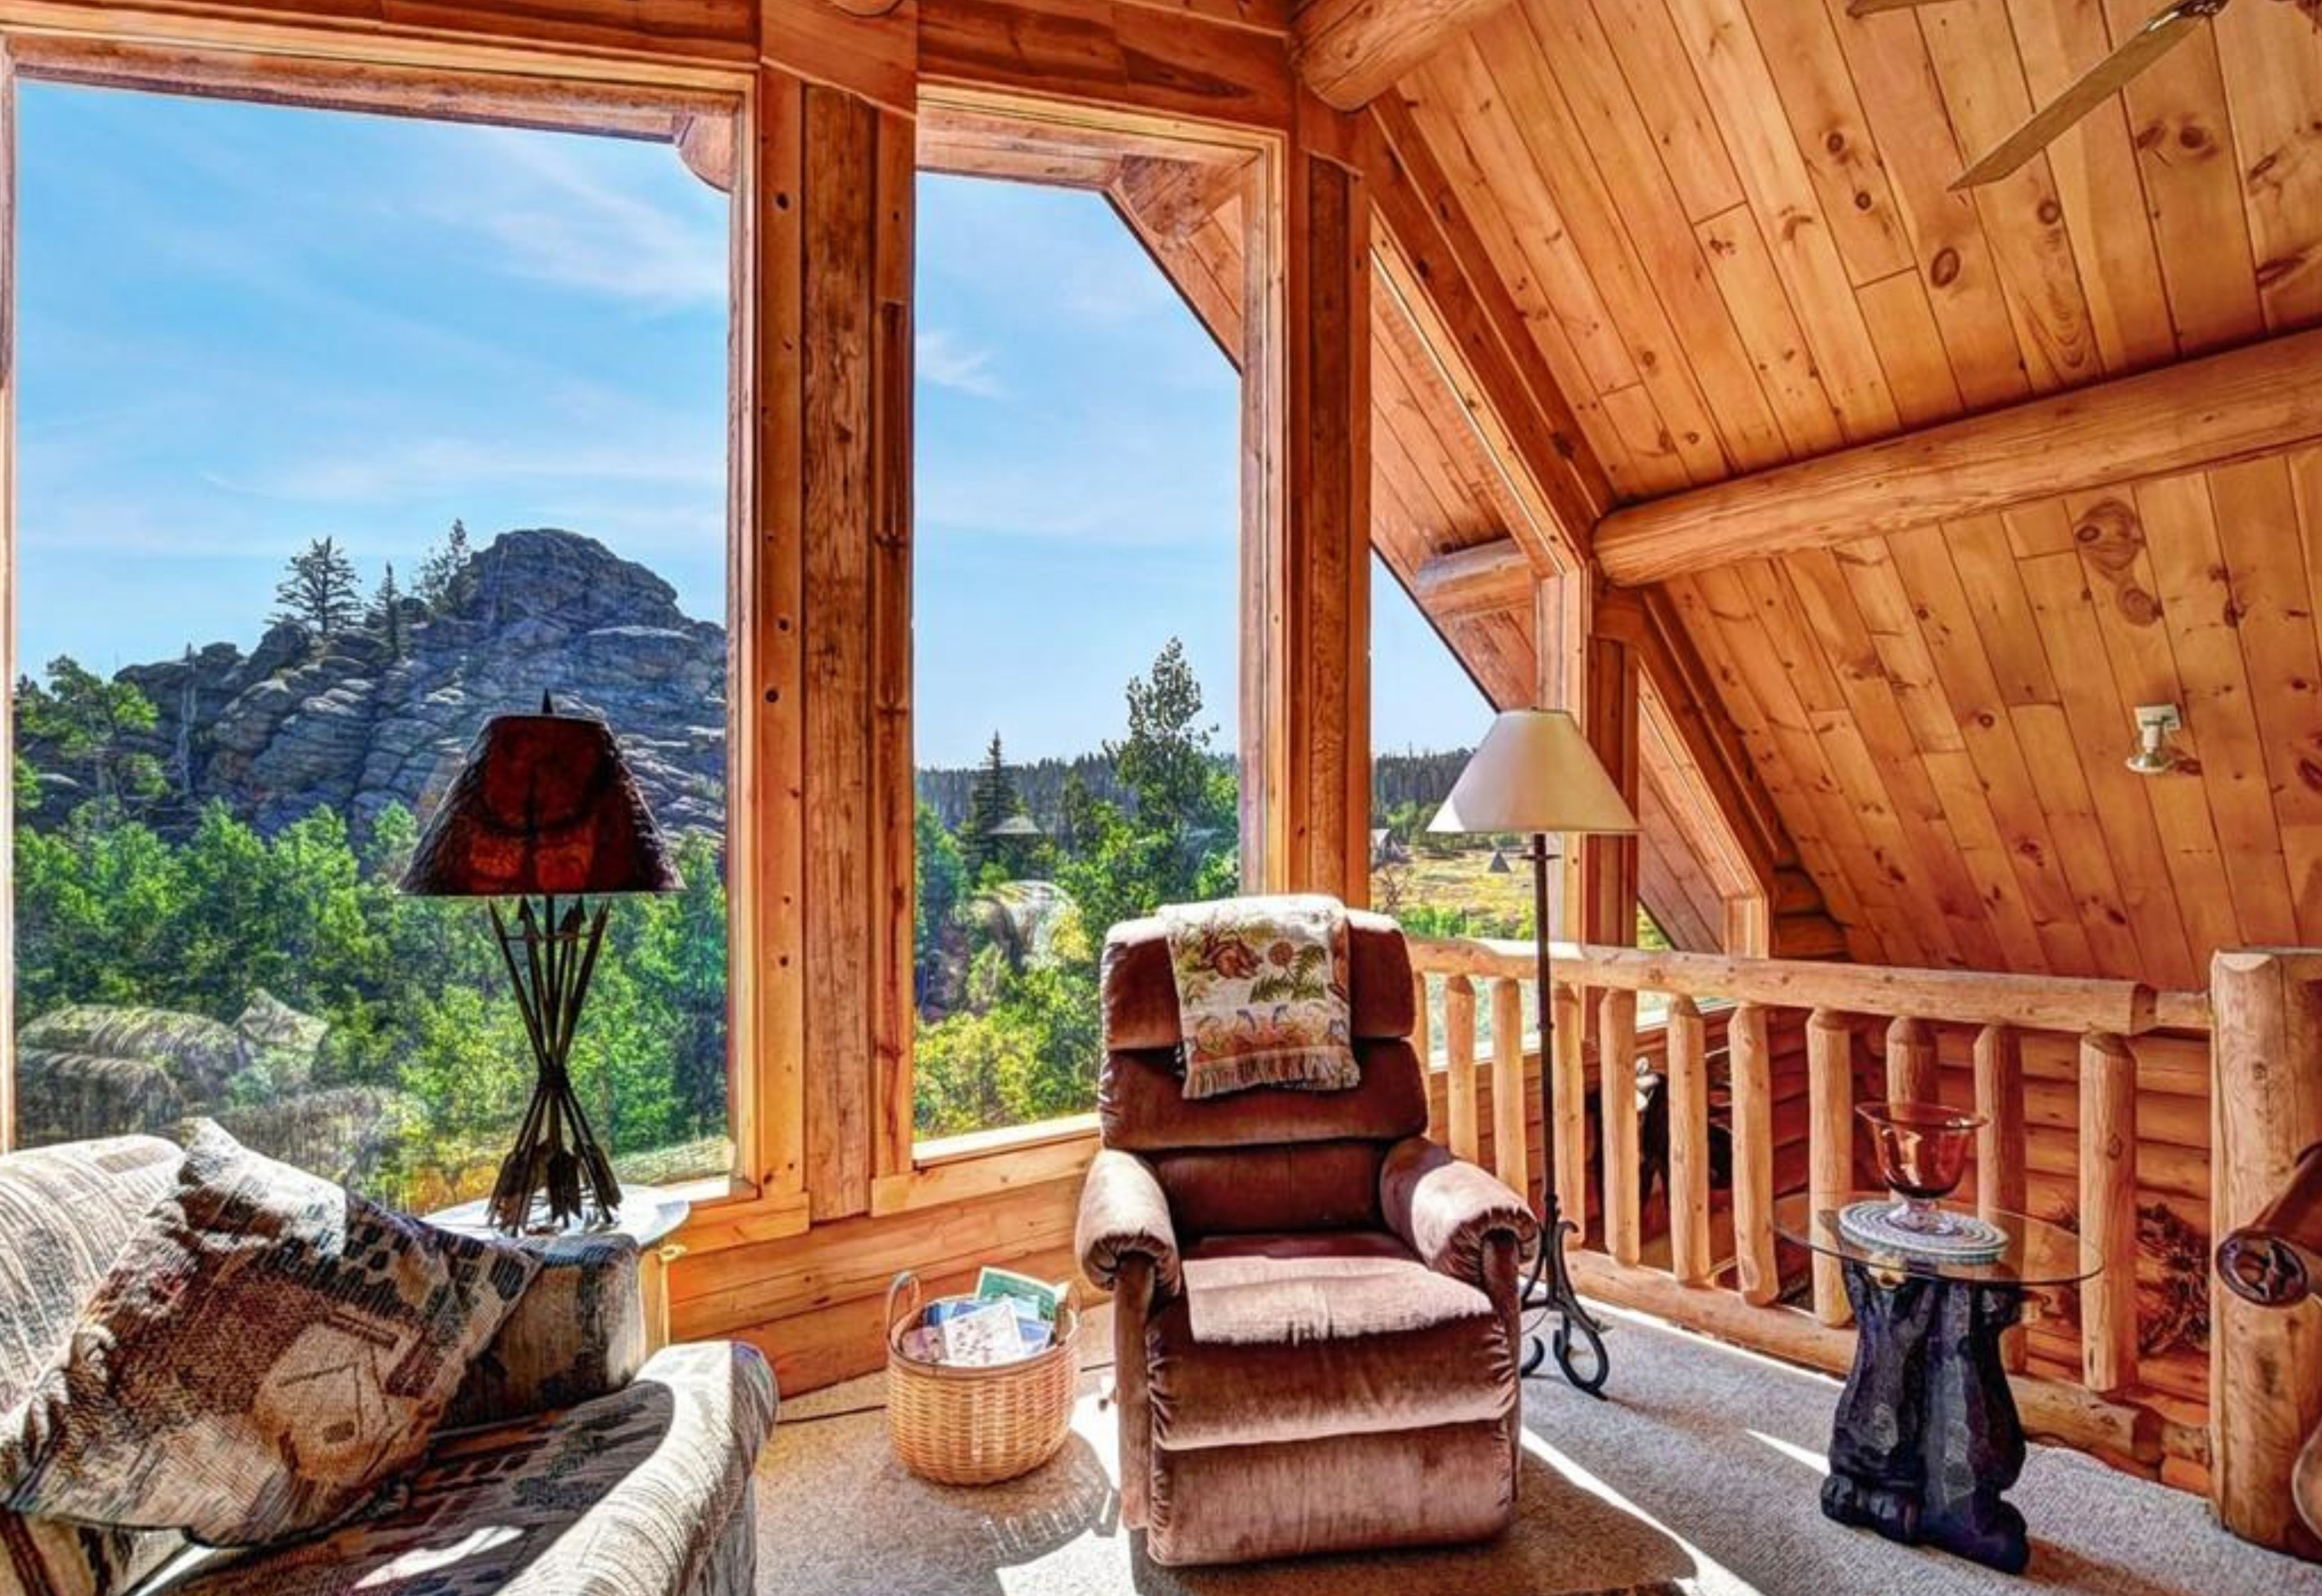 Guide To Decorating A Mountain Cabin - Colorado Style Home Furnishings